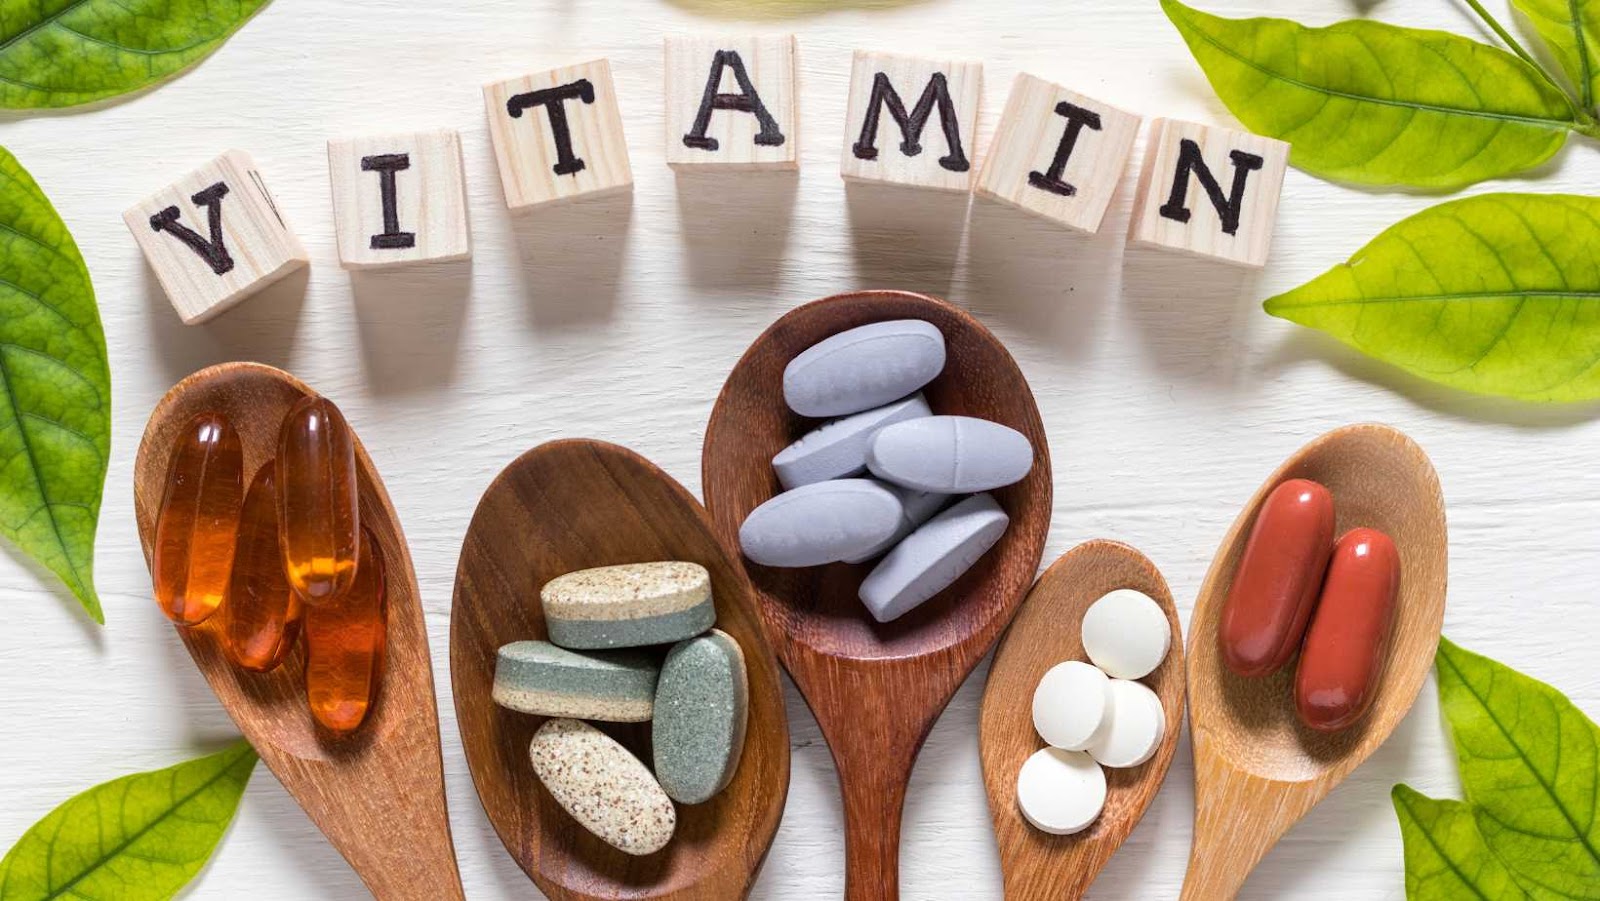 Are There Any Risks Associated With Taking Vitamins?